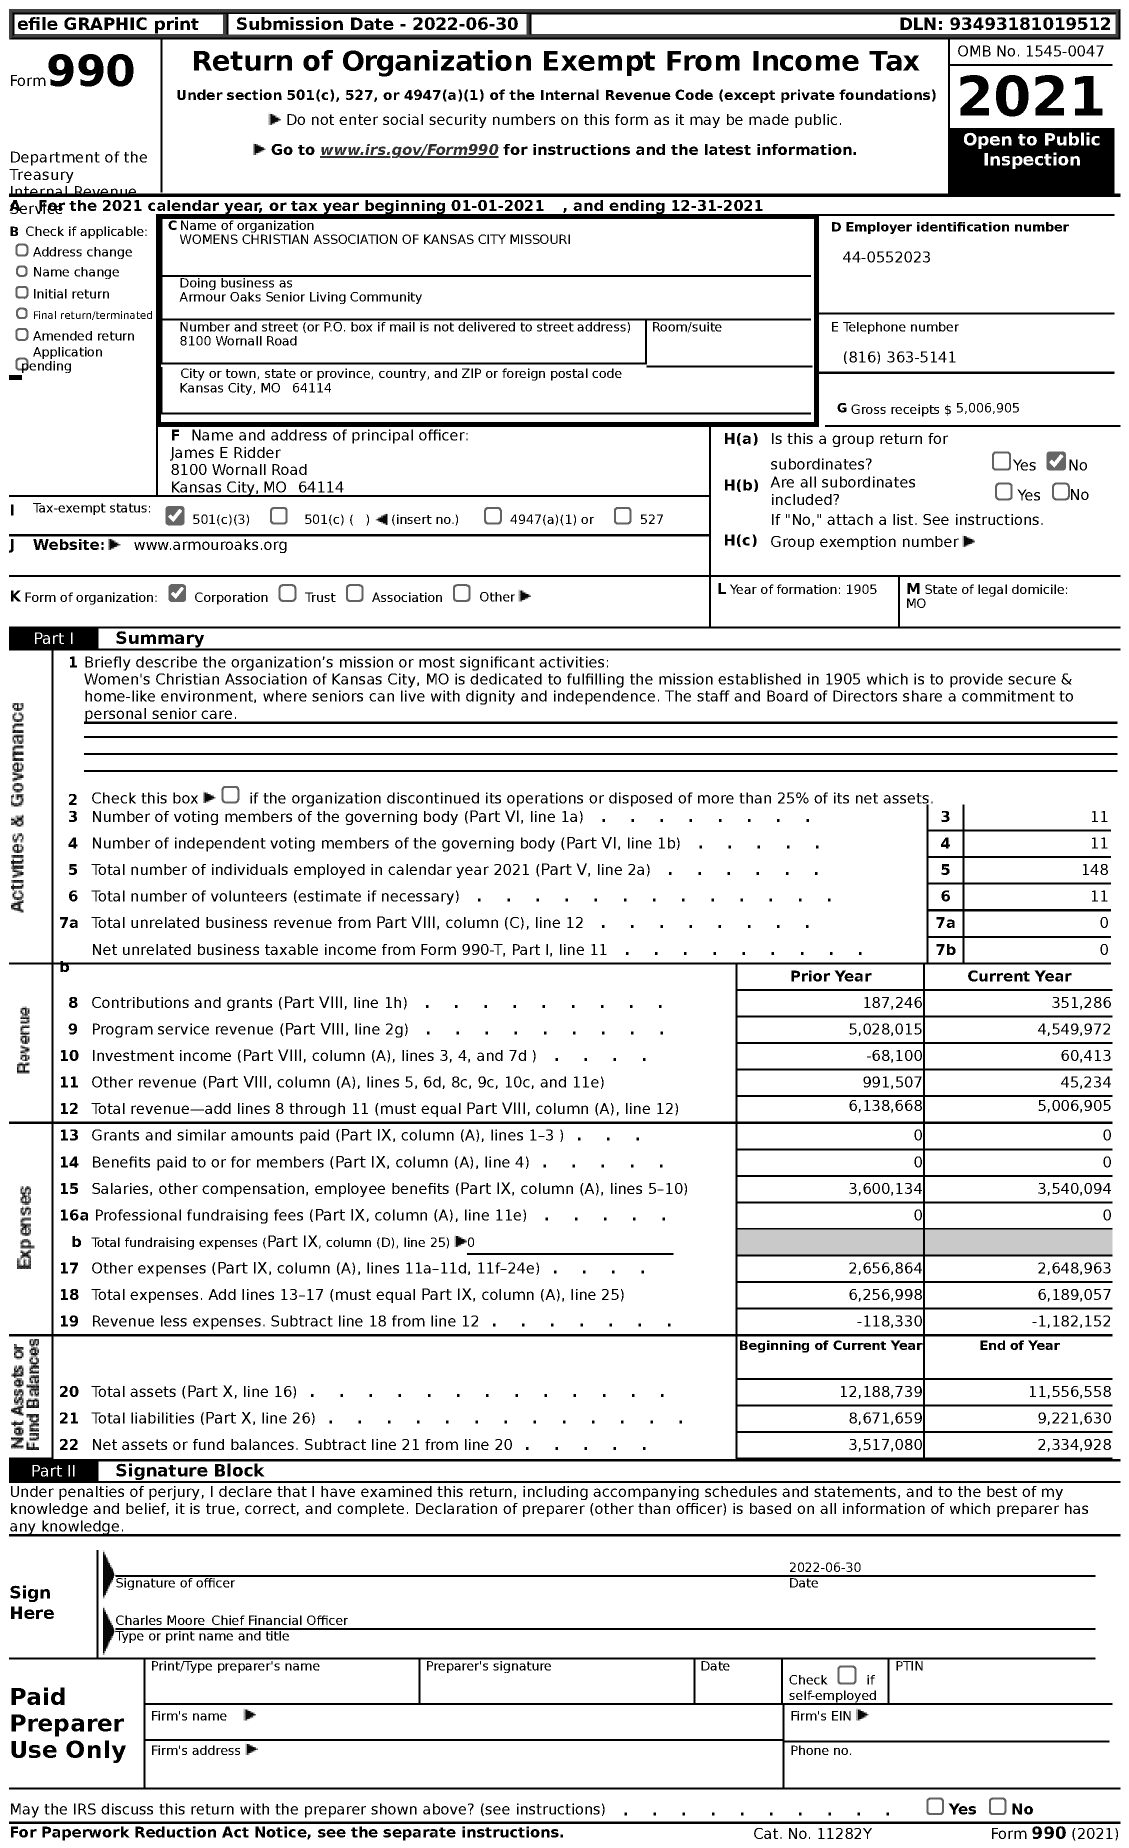 Image of first page of 2021 Form 990 for Armour Oaks Senior Living Community